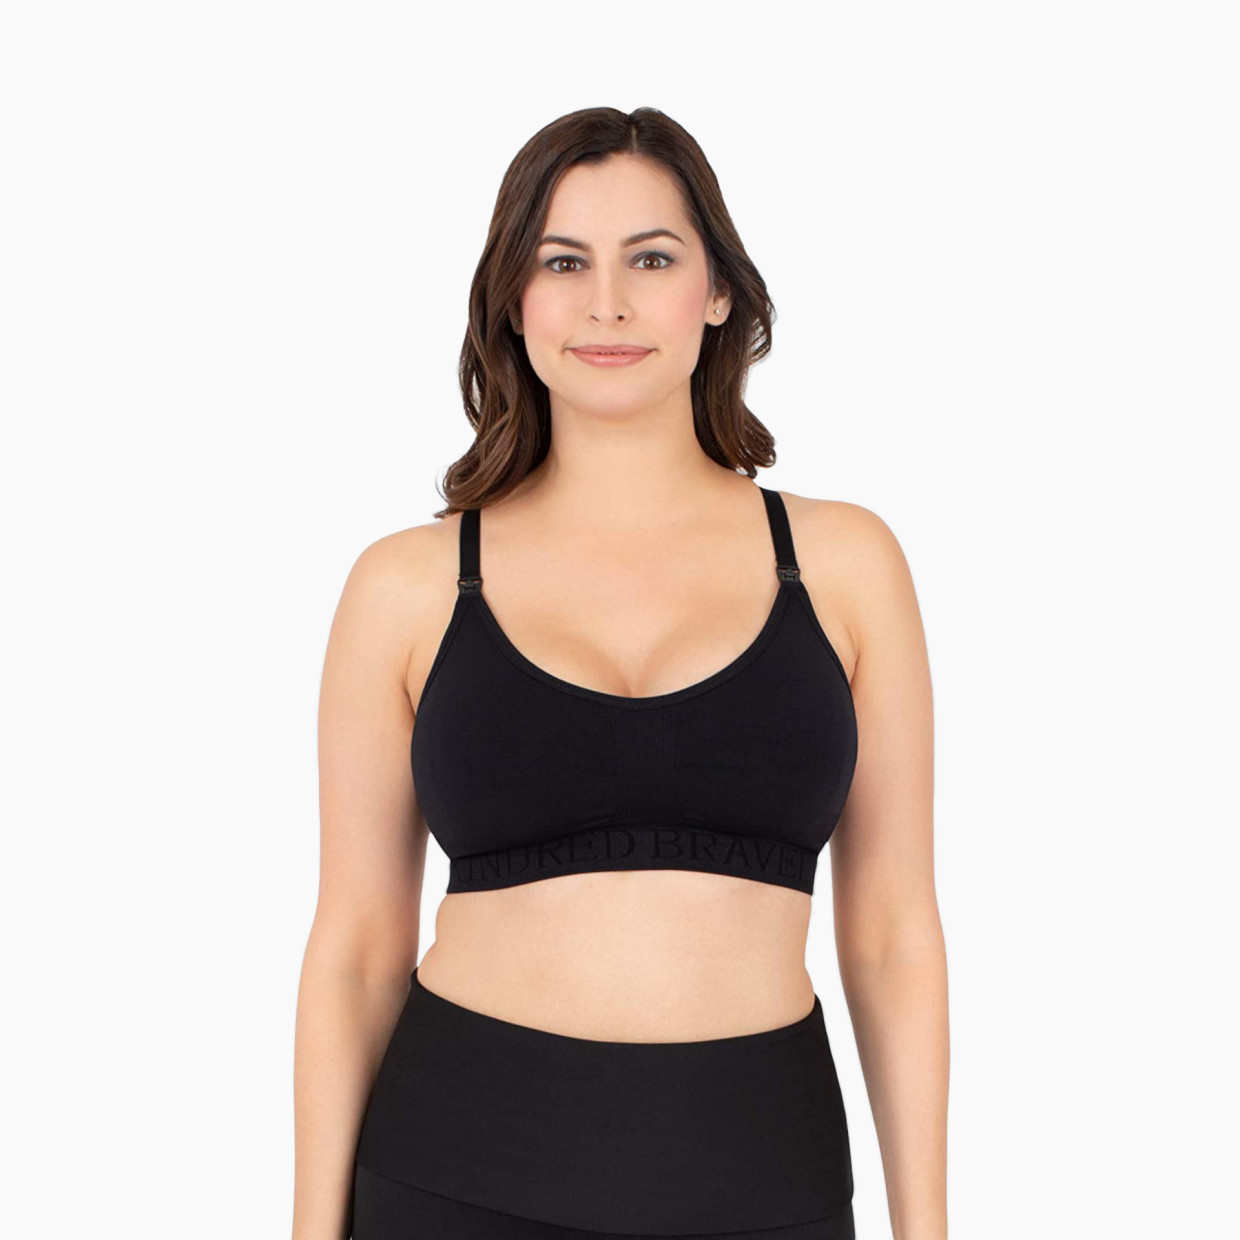 Kindred Bravely Sublime Support Low Impact Nursing & Maternity Sports Bra - Black, Small.